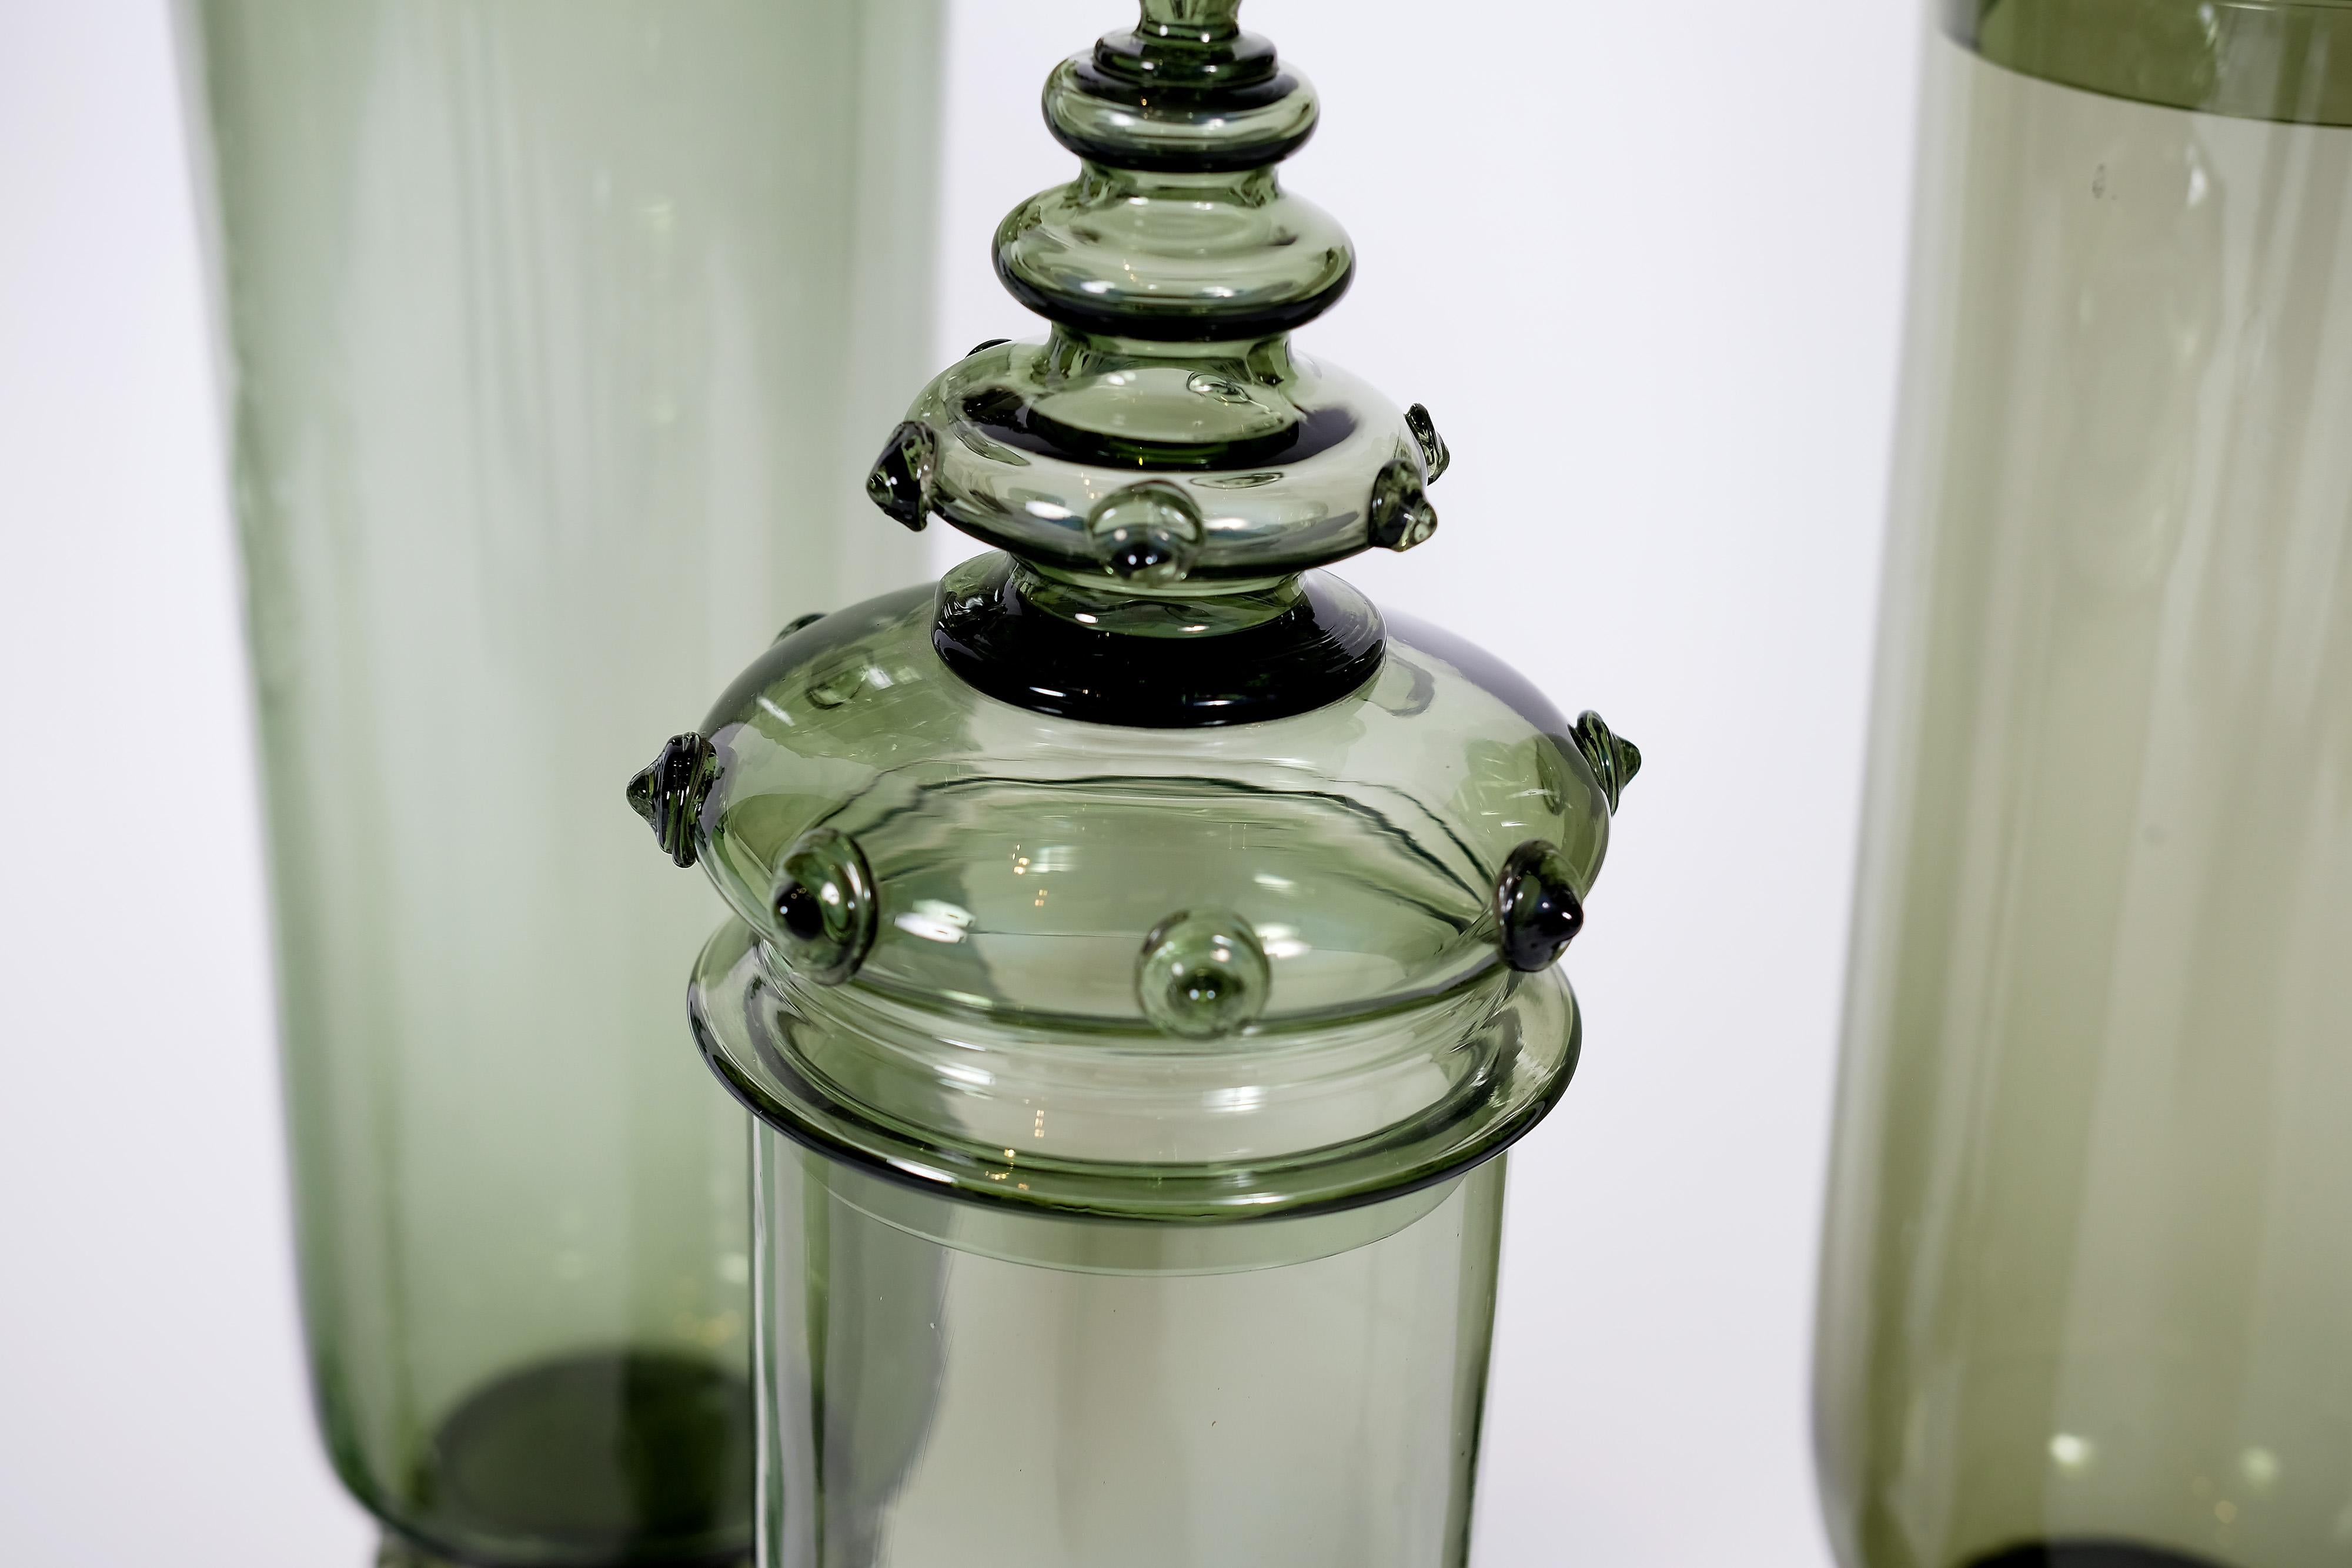 Early 20th century set of 5 apothecary green glass jars by renowned Austrian glass makers J.L. LOBMEYR.

SIZES RANGING FROM
TALLEST: 
32 inches tall
7.5inches wide
To SHORTEST
19 inches tall
4 inches wide.